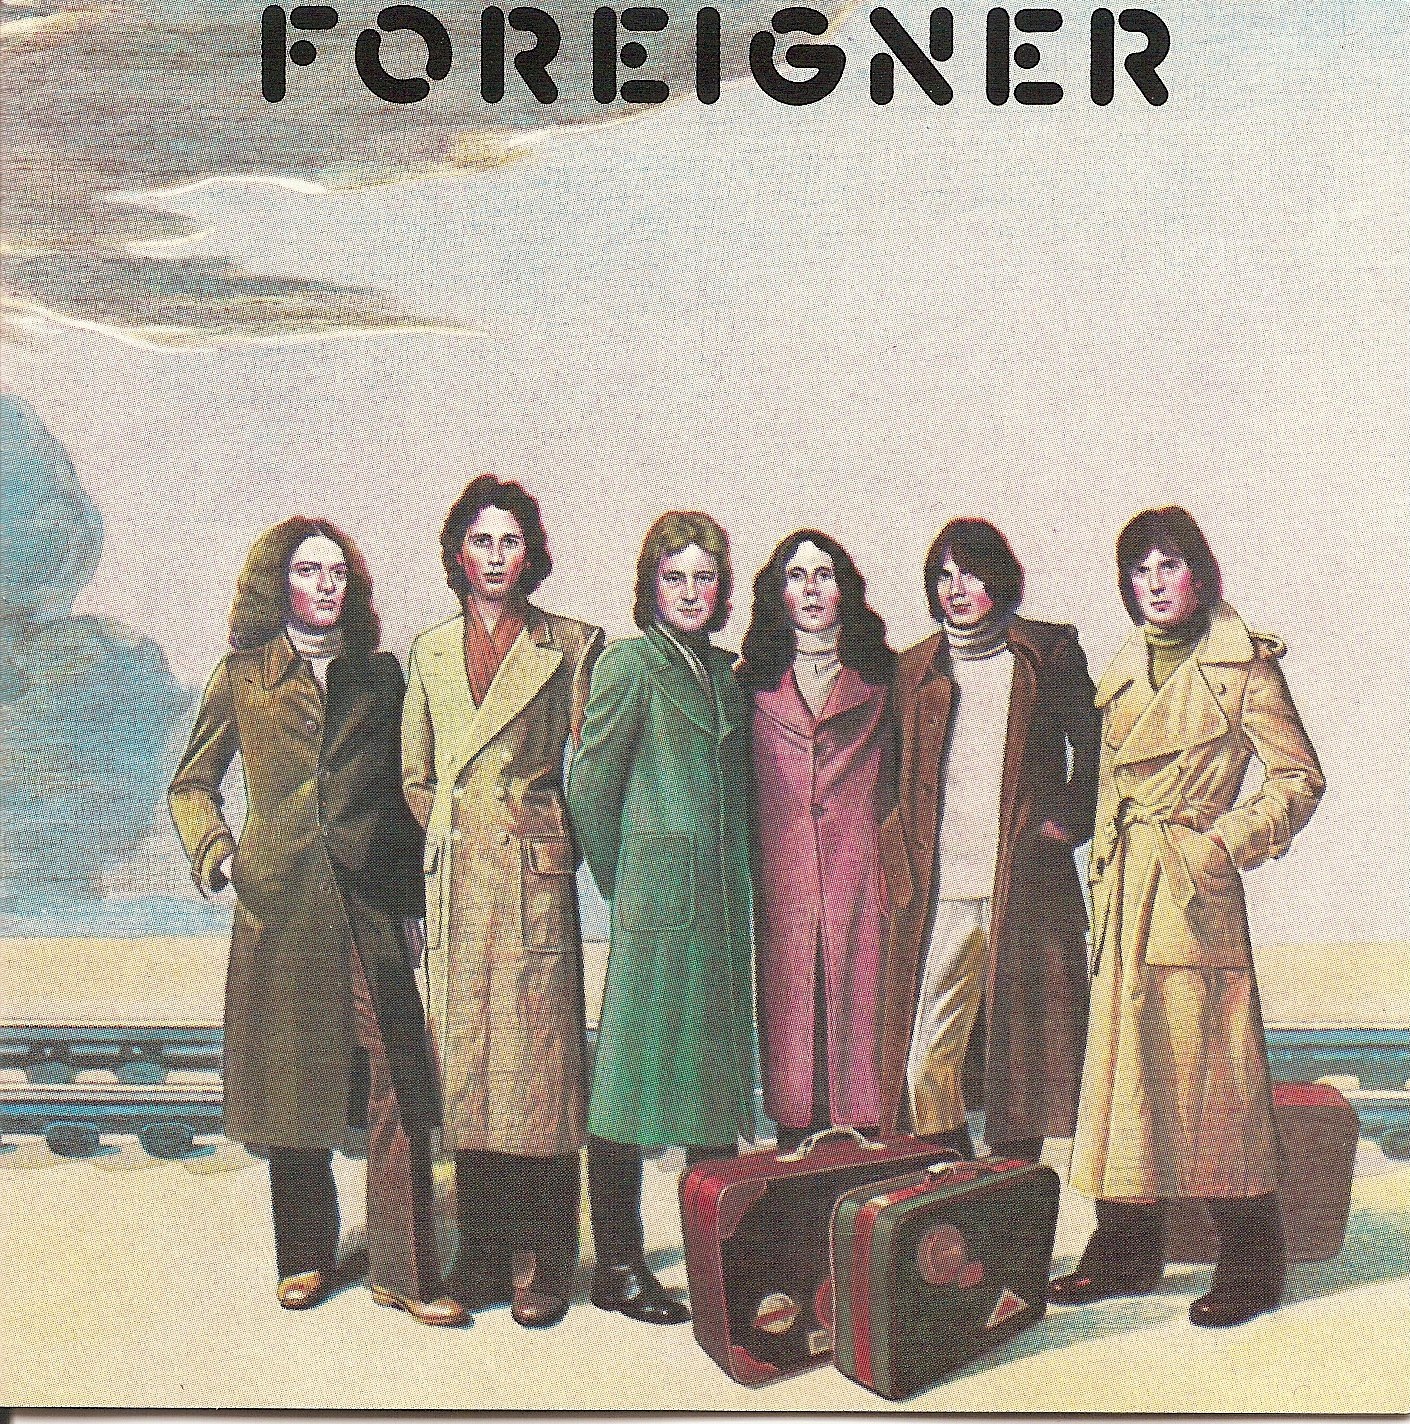 Foreigner first album cover